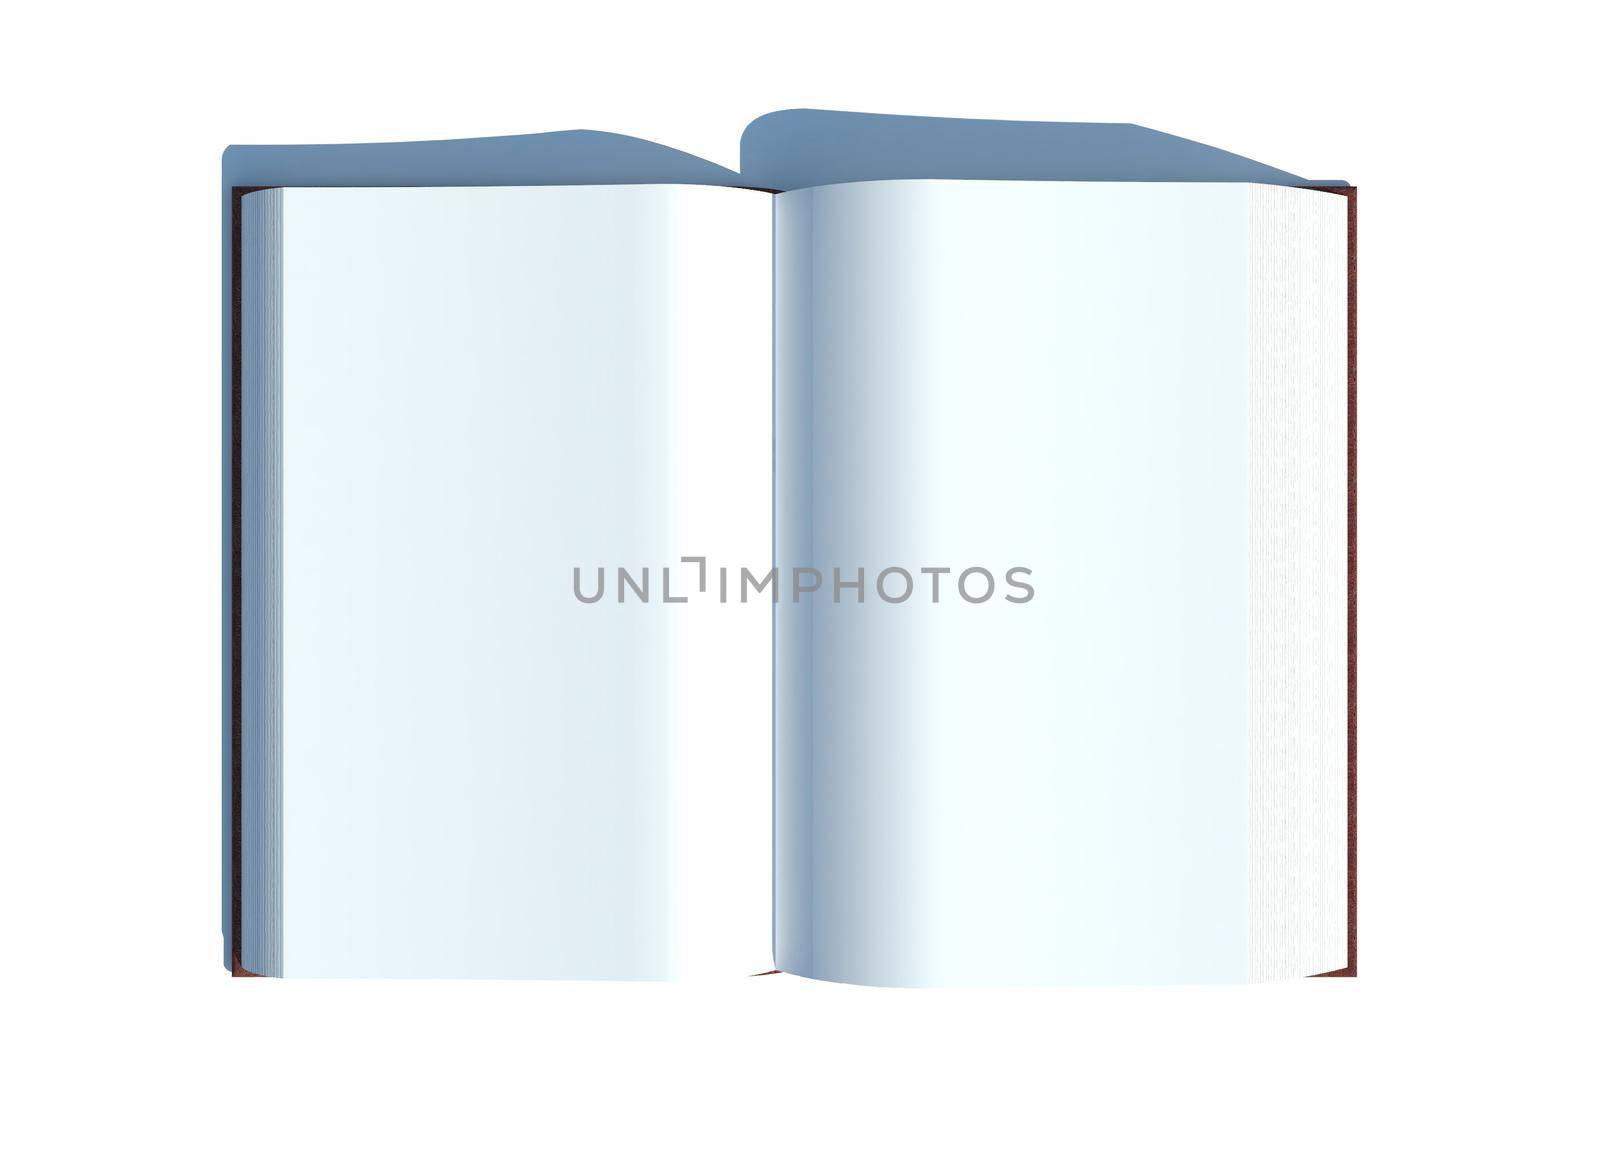 Blank open book or sketchbook with shadow, front view in white isolated background by tabishere